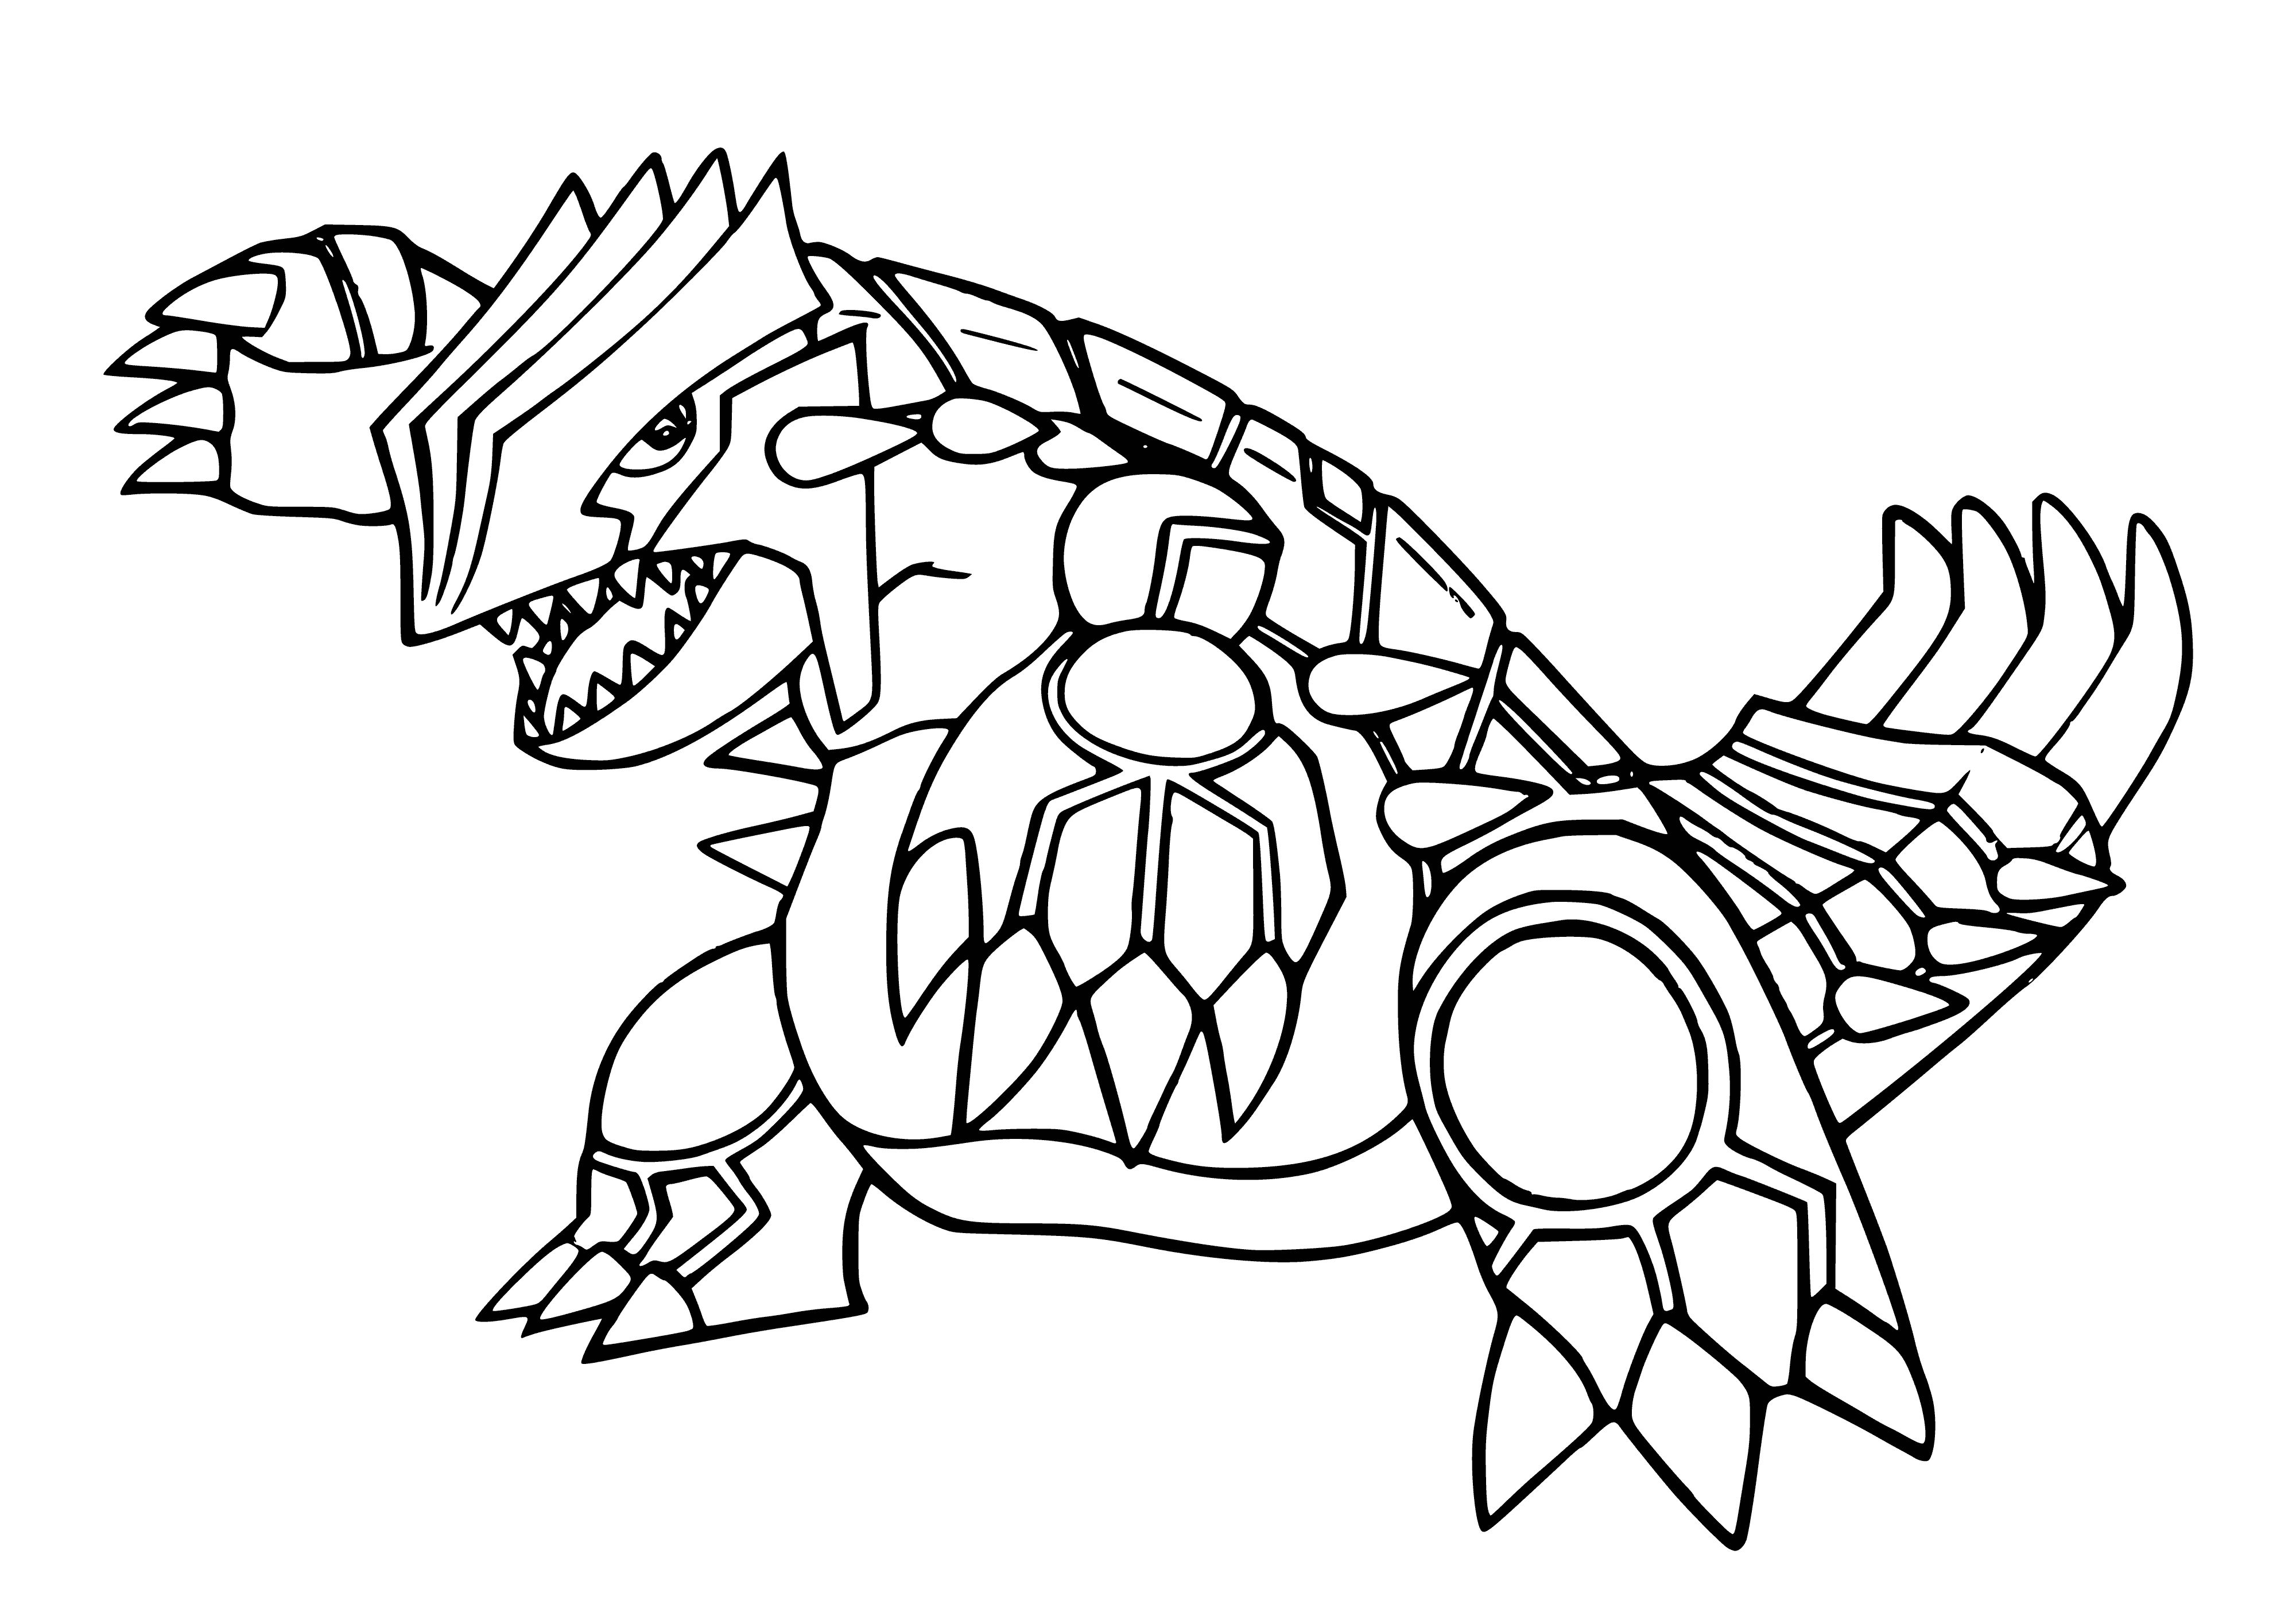 coloring page: Large orange dinosaur-like Pokemon w/tail, big claws, rock-like plates, red eyes & horns.